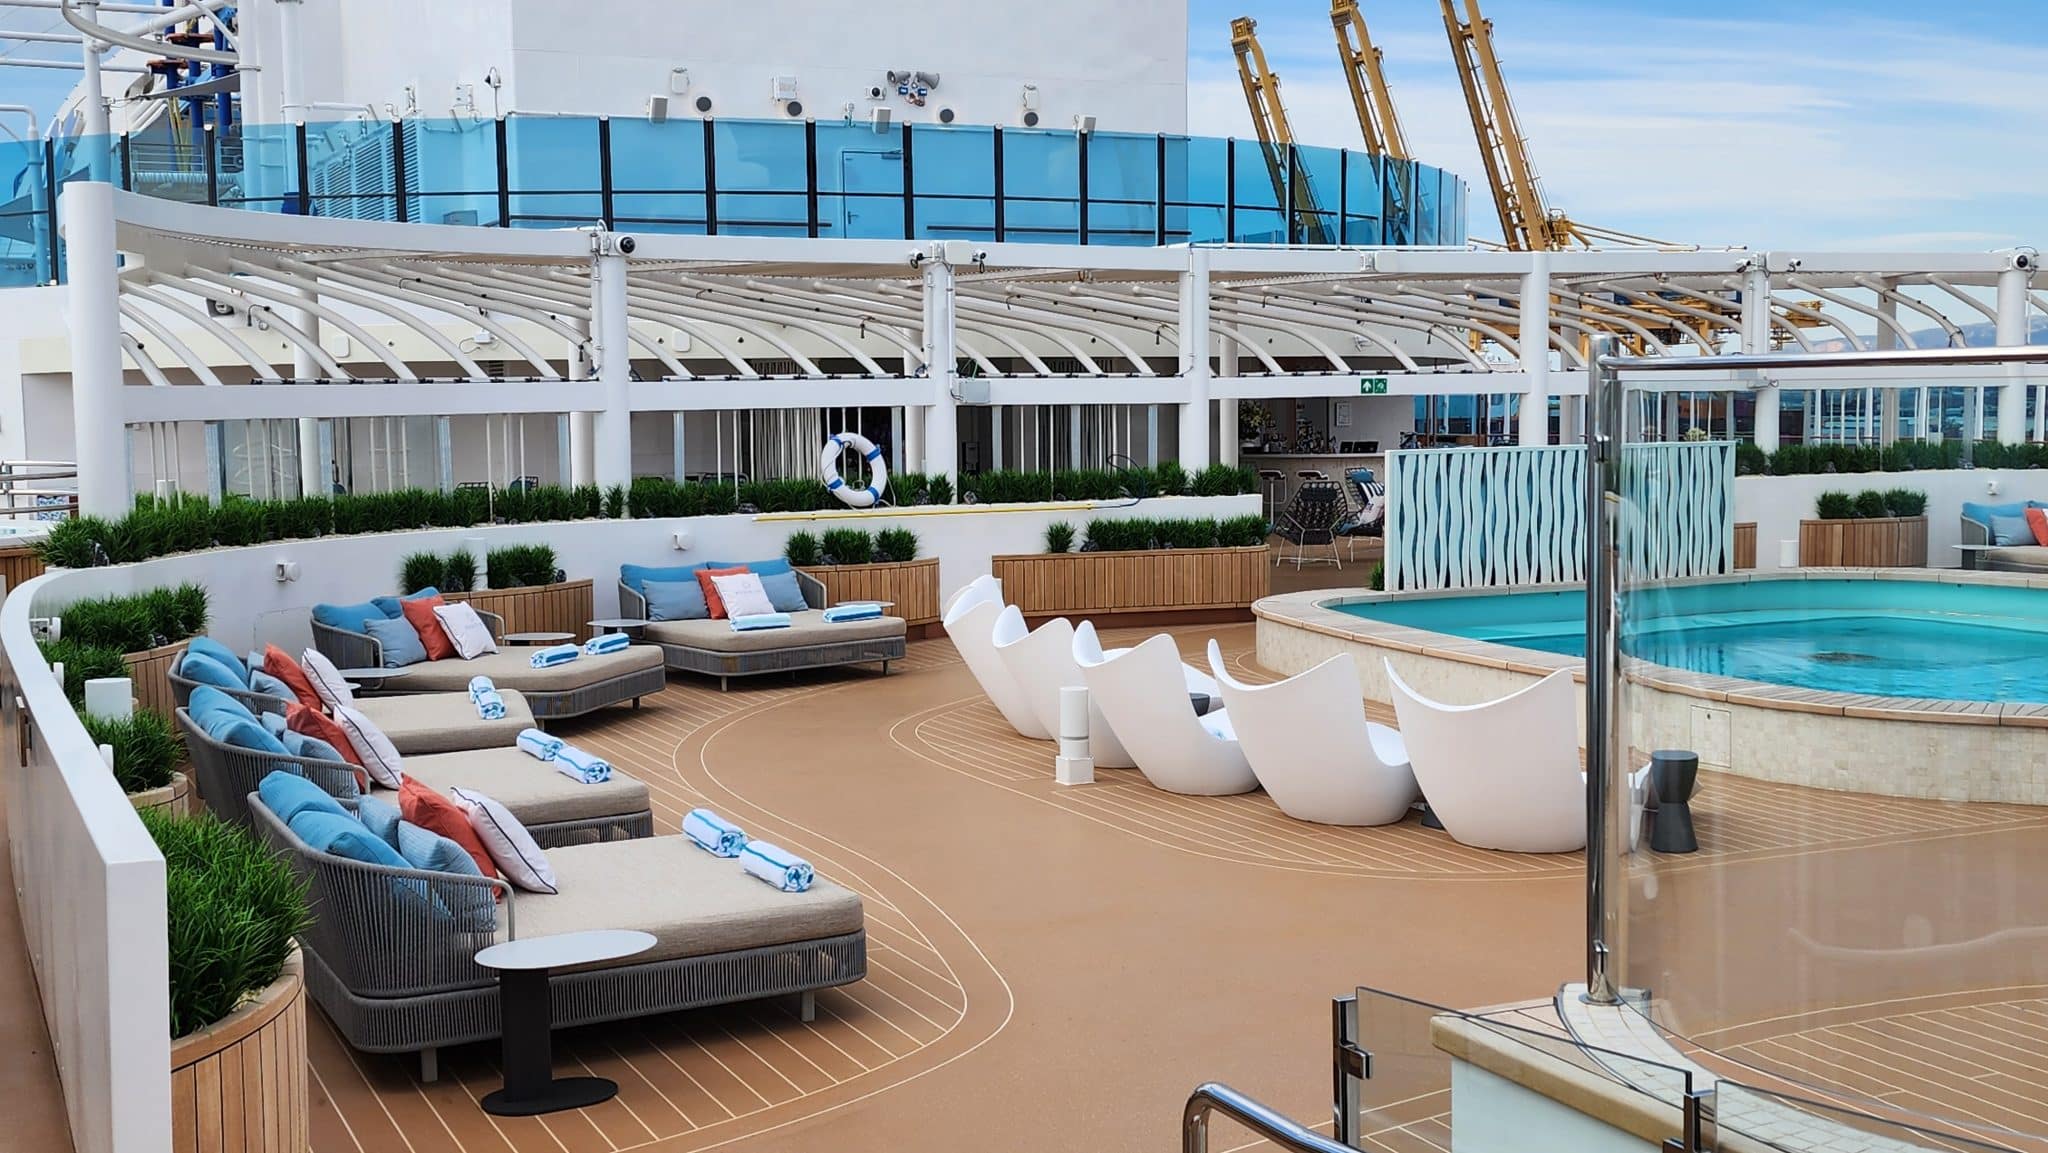 Five New Updates From Princess Cruises That Include a New VIP Area